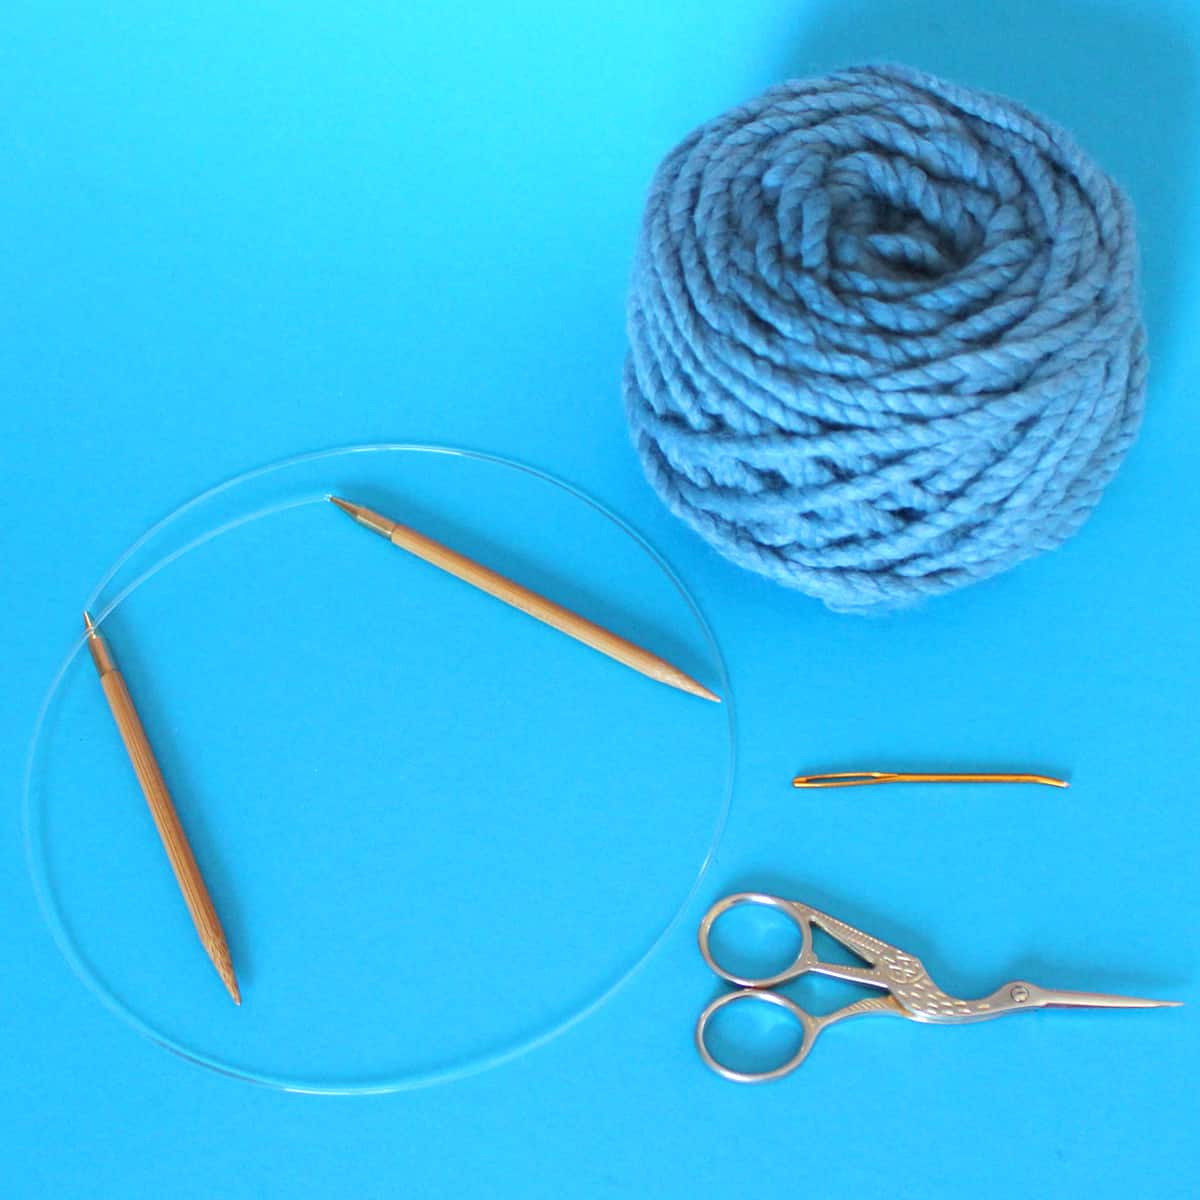 Knitting supplies of circular needle, tapestry needle, scissors, and super bulky yarn in blue color.